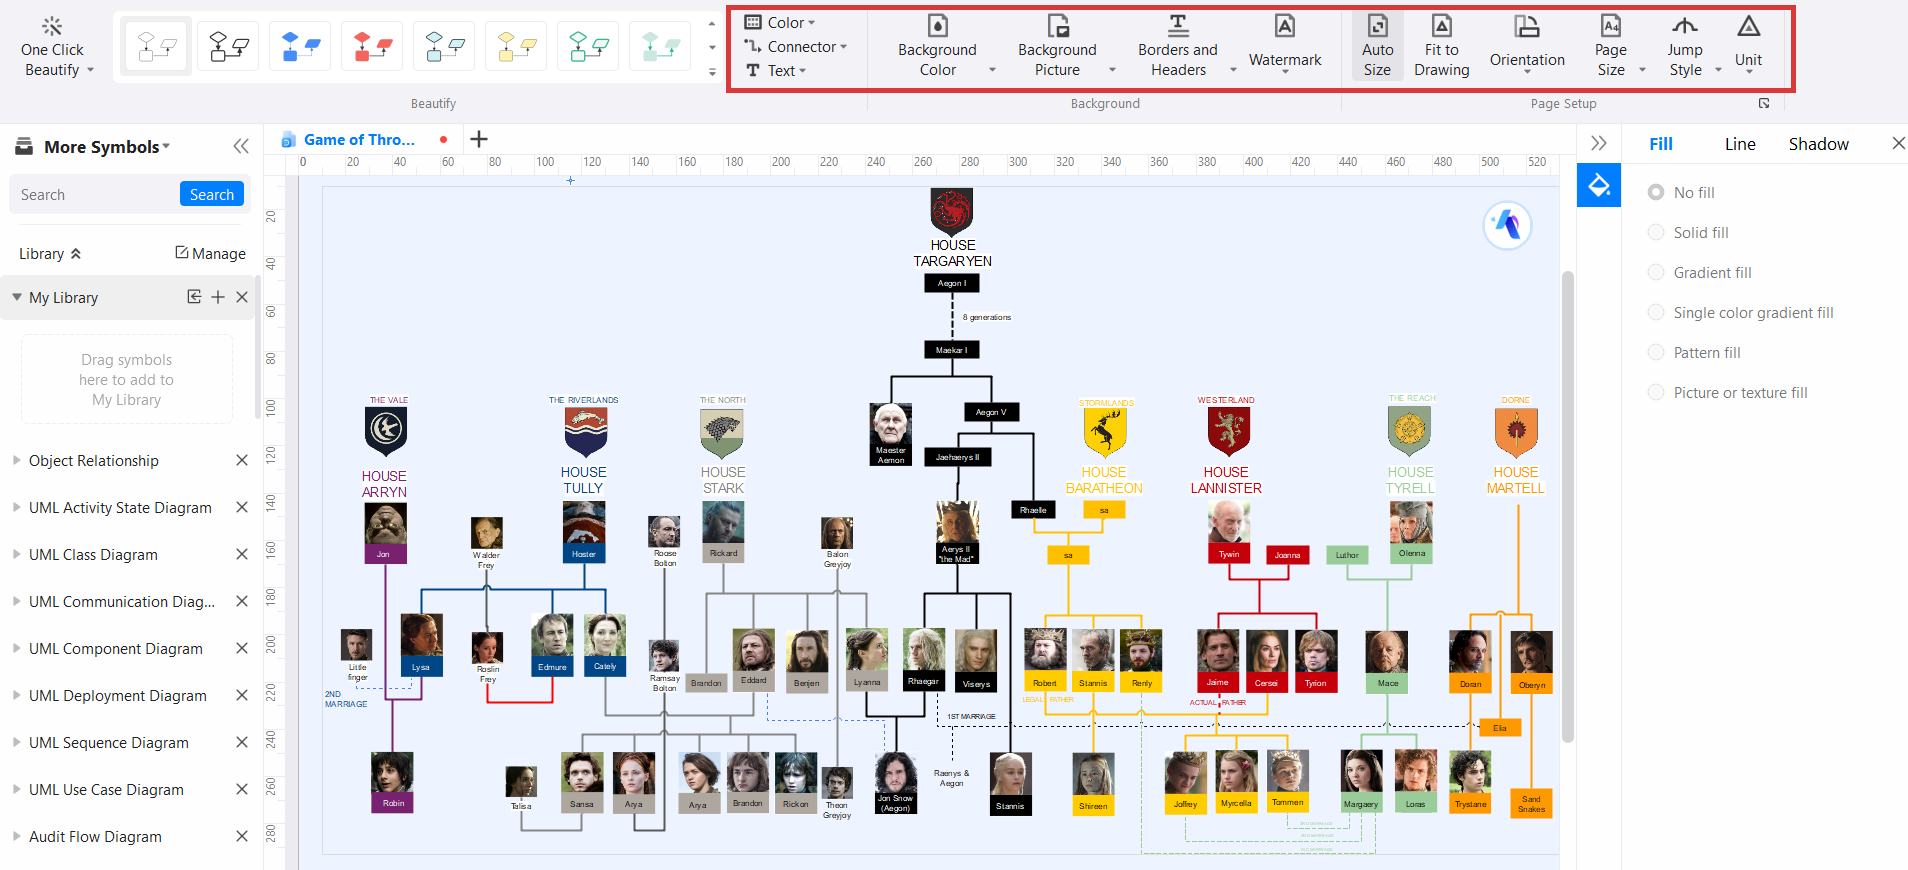 family tree from Game of Thrones